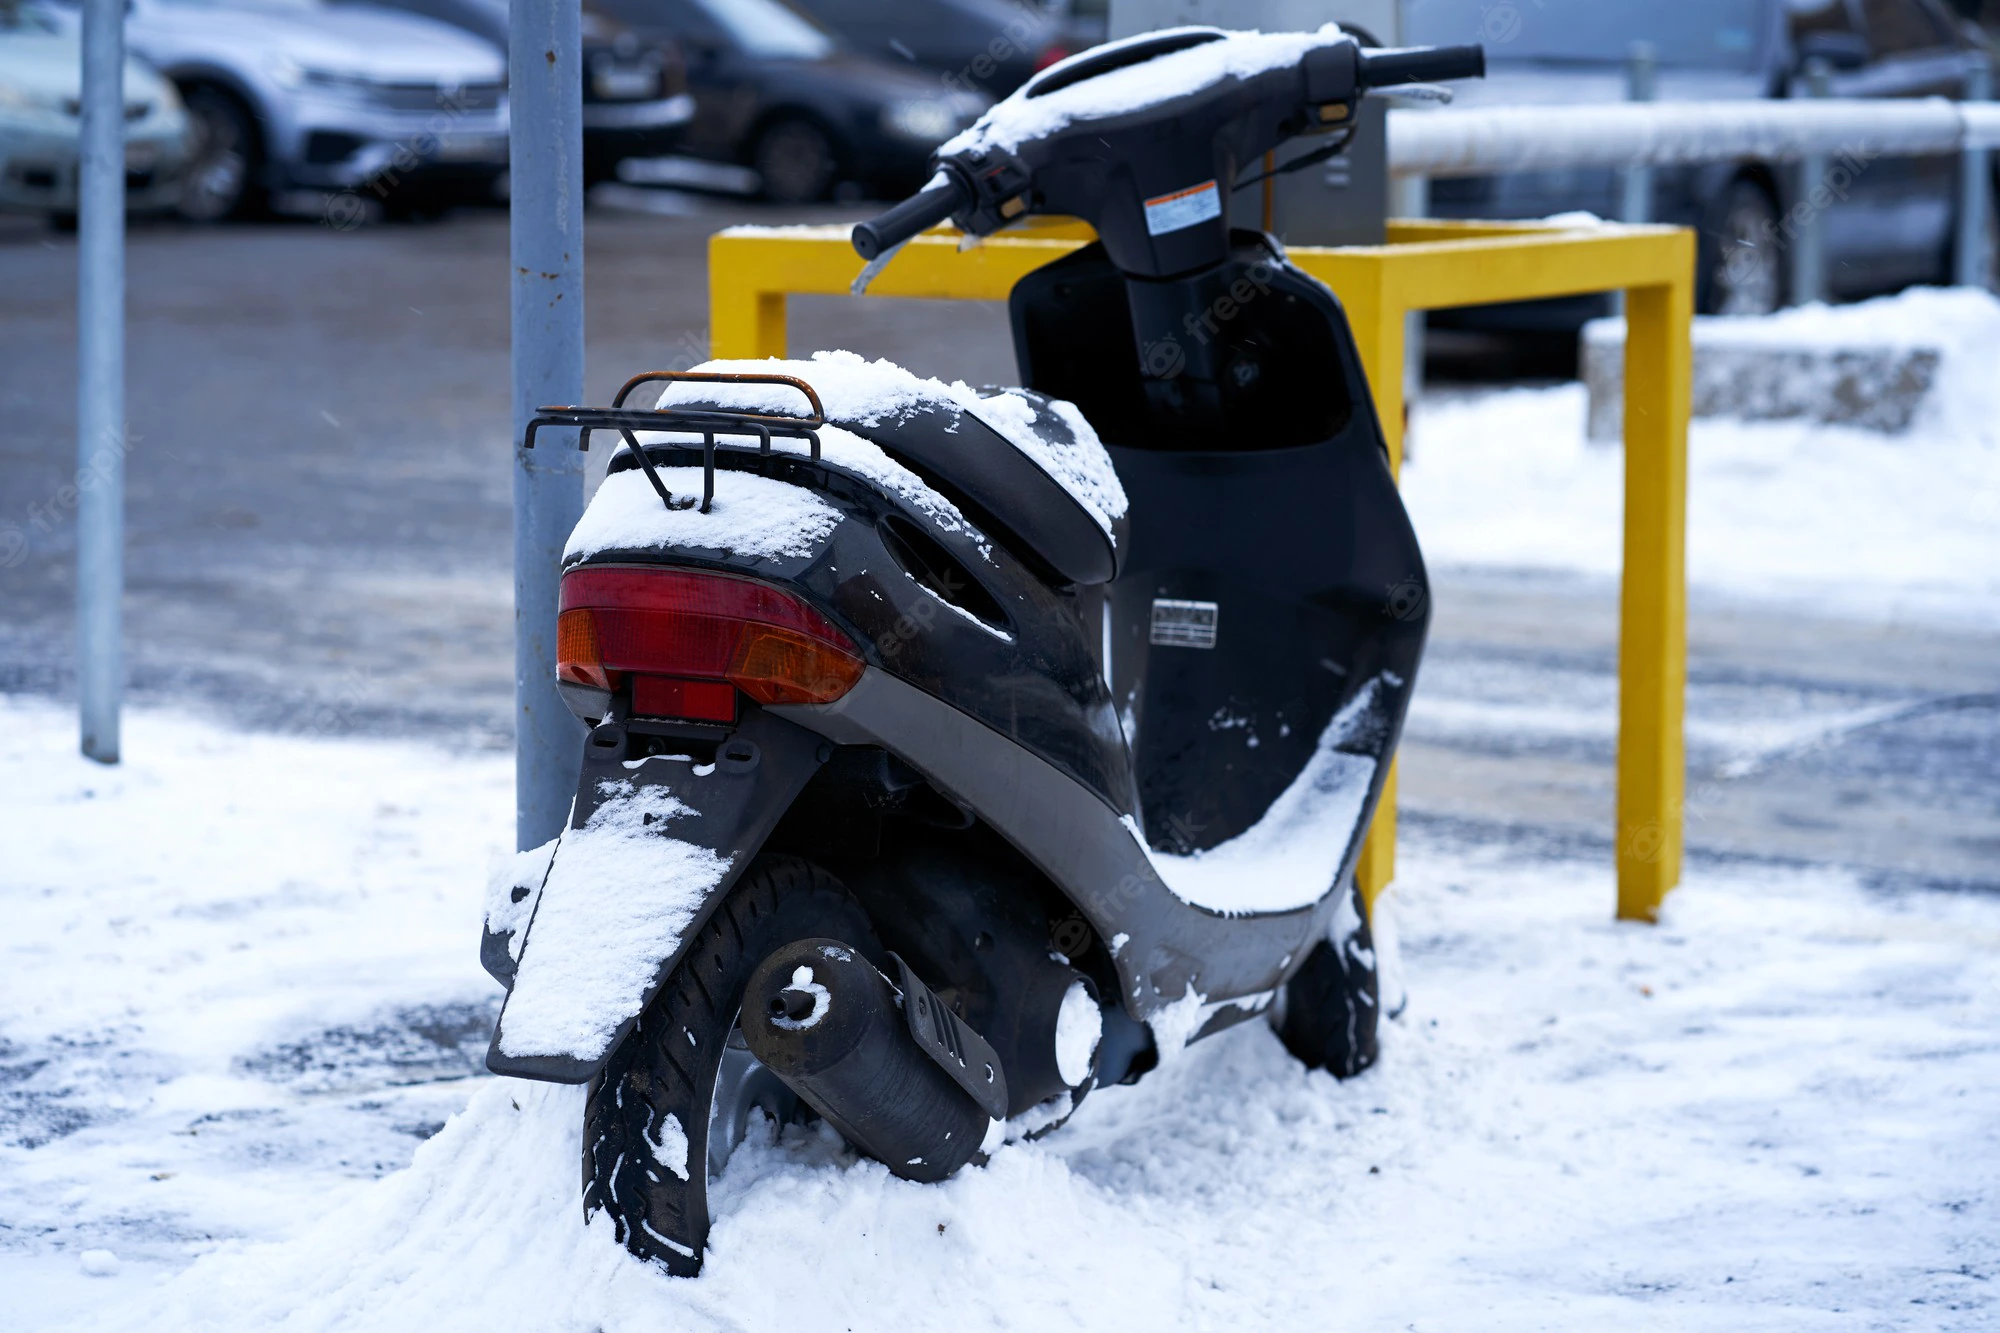 petrol driven scooter parked on the edge of a street in the snow